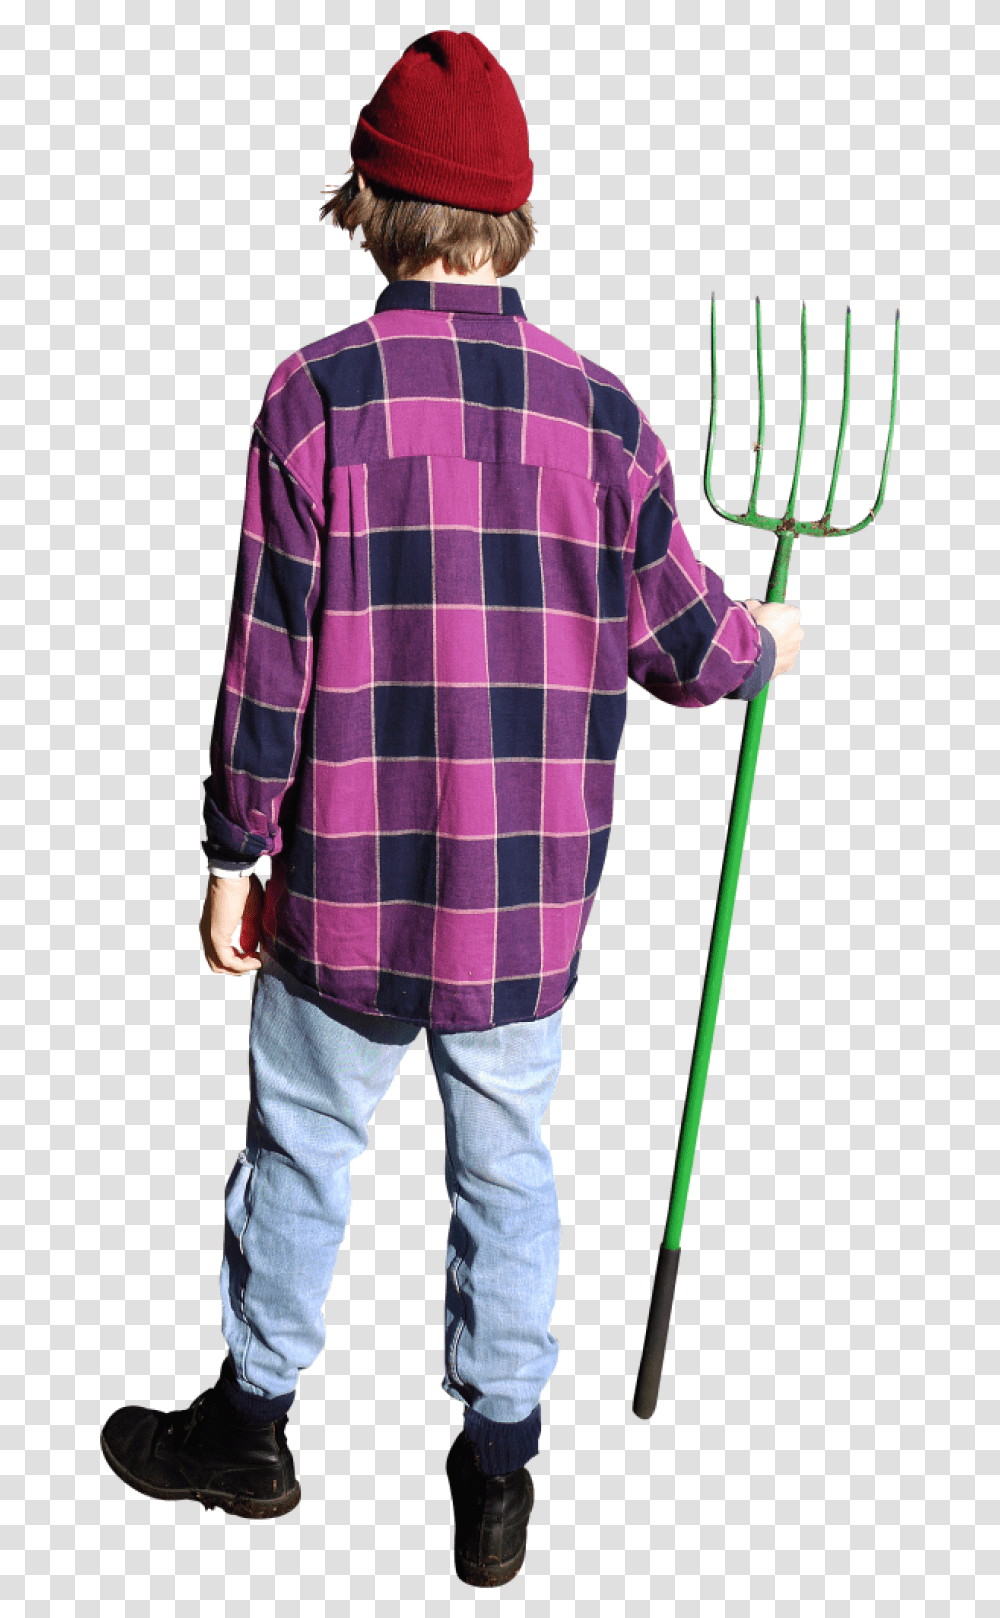 Download Farmer Watching Image For Free Farm Person, Human, Clothing, Apparel, Shoe Transparent Png